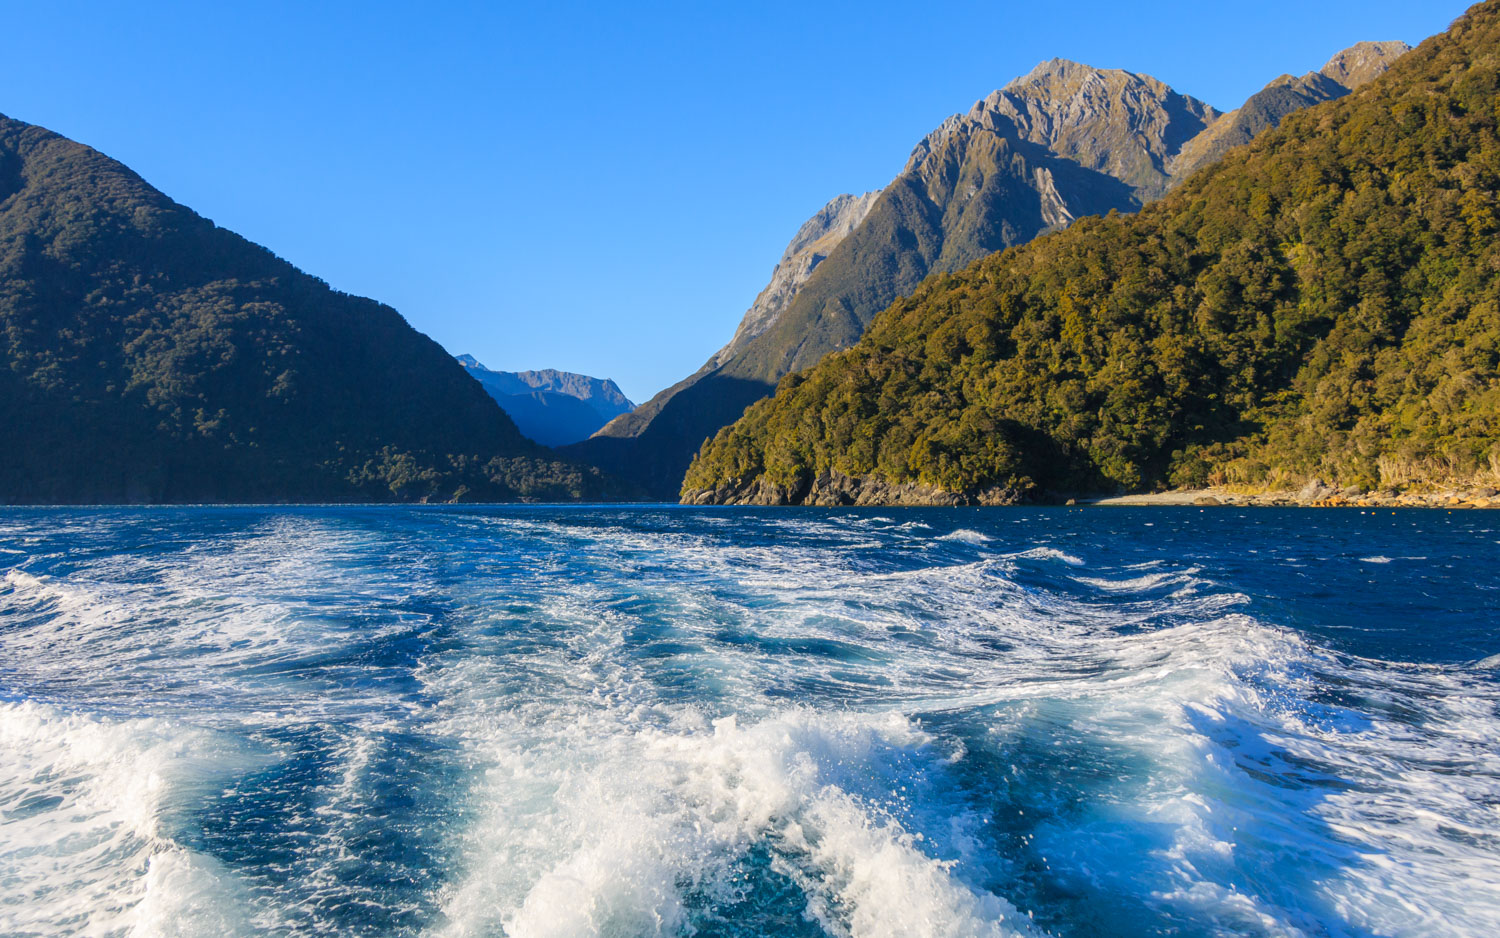 Cruise in Milford Sound